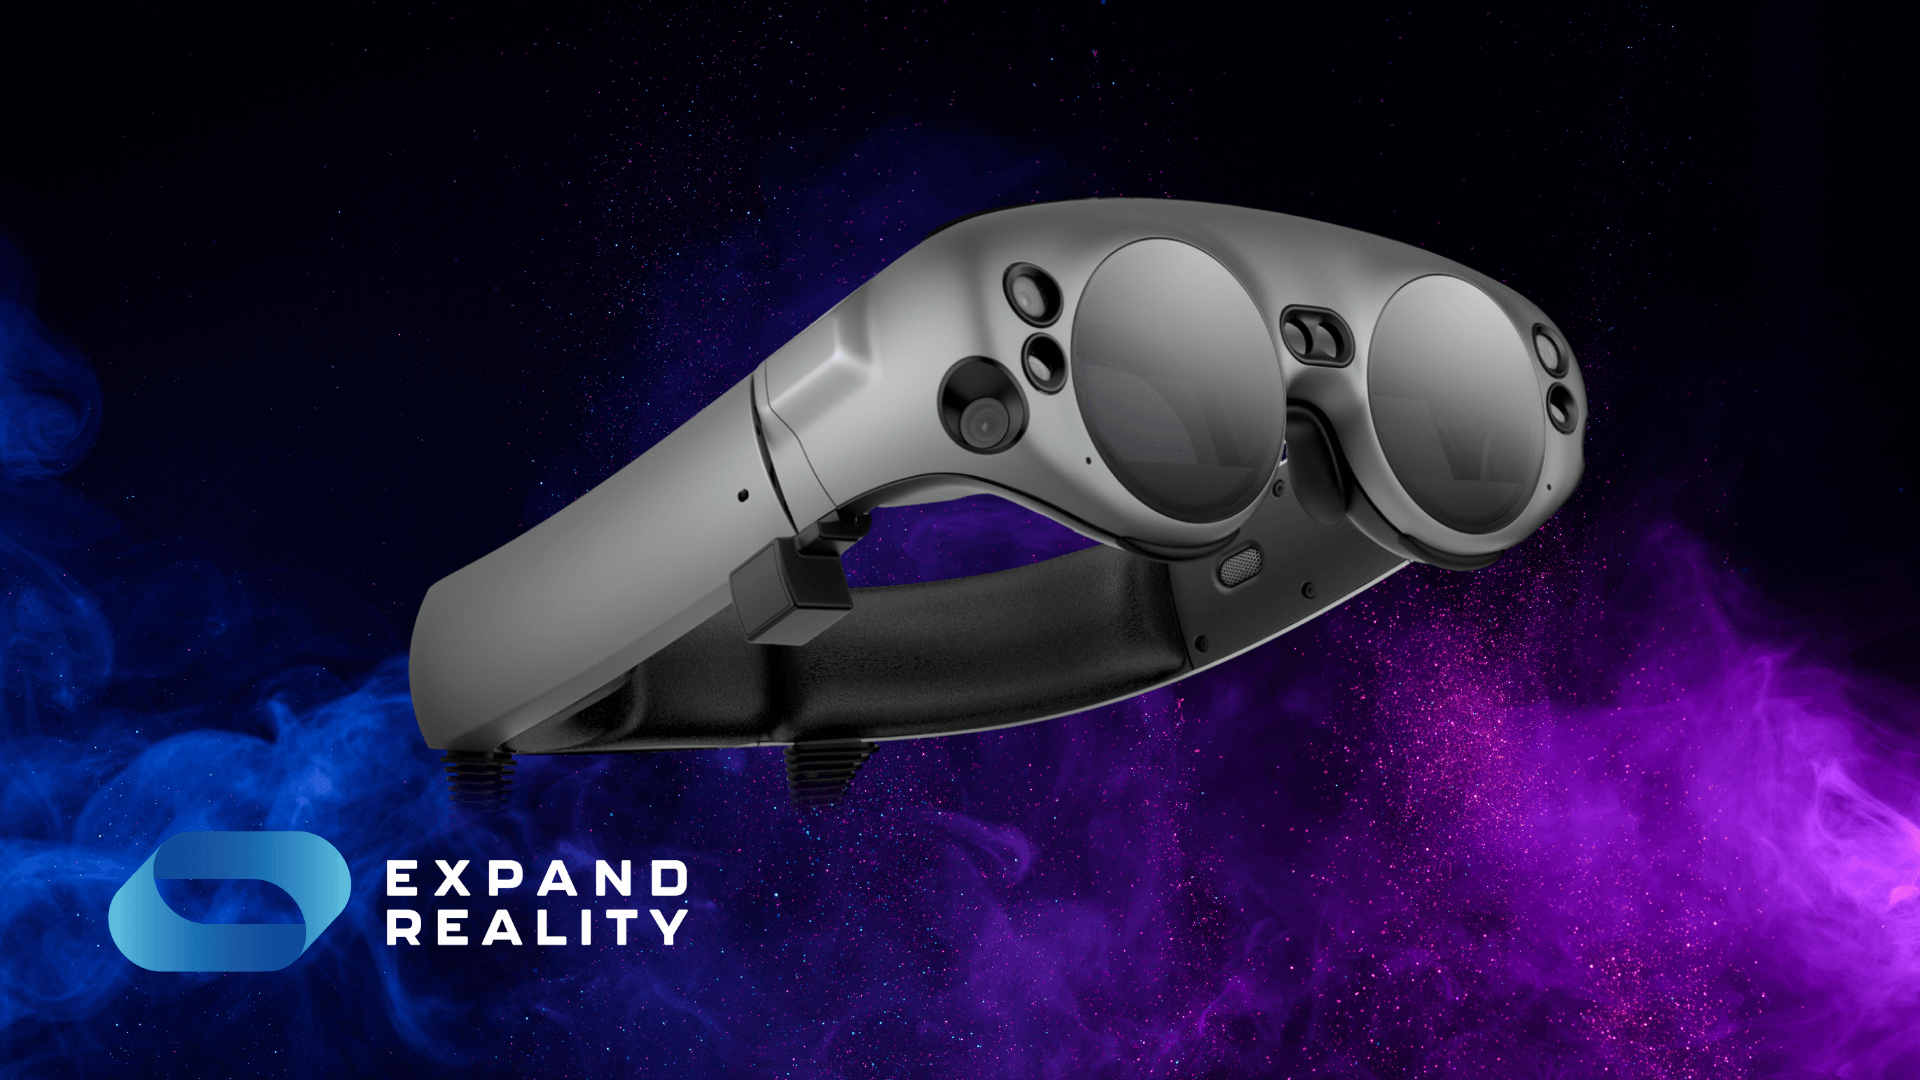 Are the Magic Leap 1 AR glasses worth it? Learn all the facts about this pioneering XR device, including industry use cases and hardware specs.